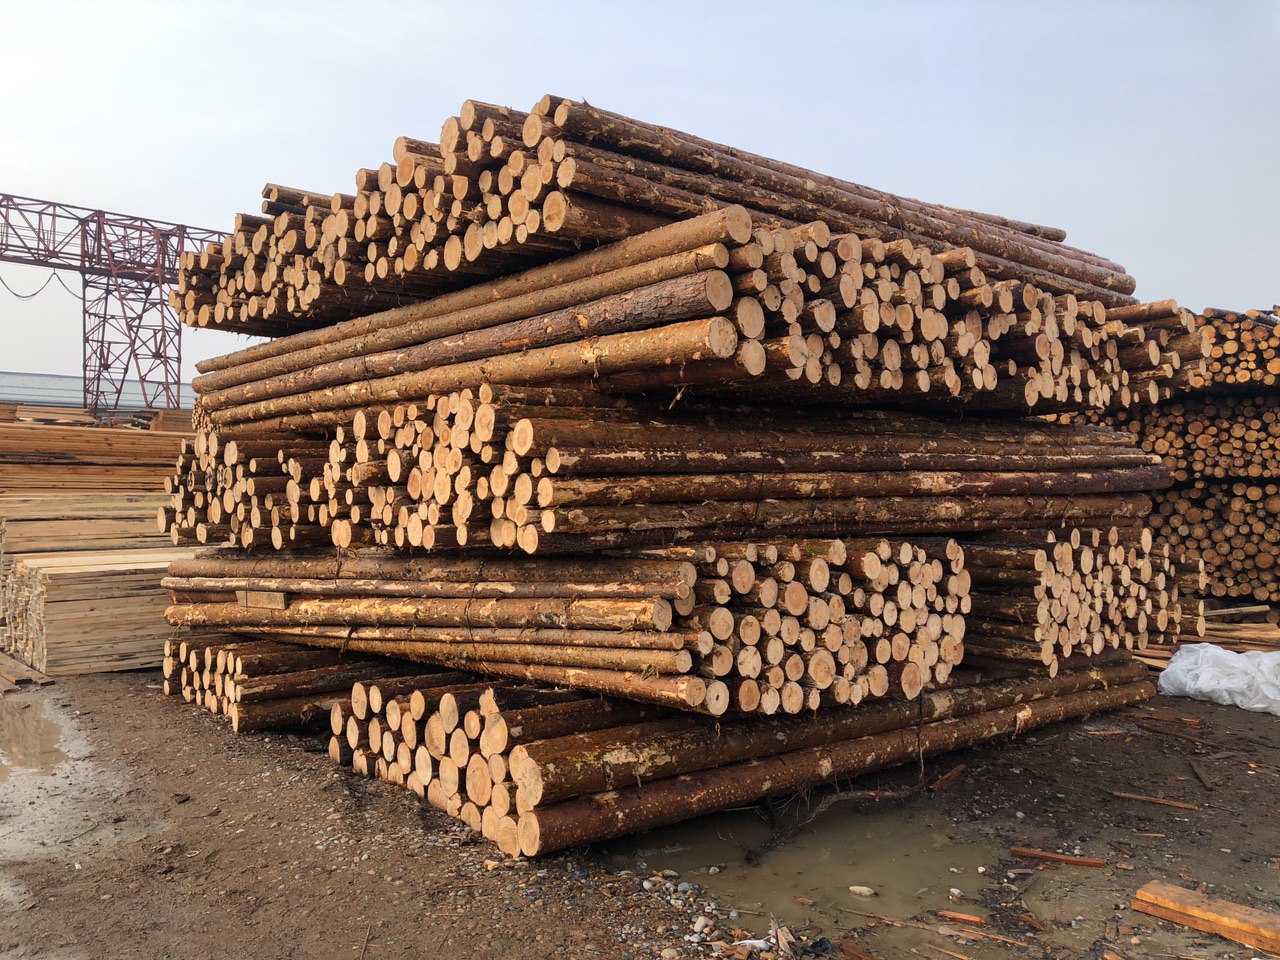 <p>Every month we buy Lumber (coniferous forest spruce),&nbsp; up to 5000 cubic meters. From&nbsp;St. Petersburg and Leningrad region</p>

<p>14-17.9 = 3850 with VAT and 2850 cash</p>

<p>18-24.9 = 4550 with VAT and 3600 cash</p>

<p>25-34 = 4850 with VAT and 3850 cash</p>